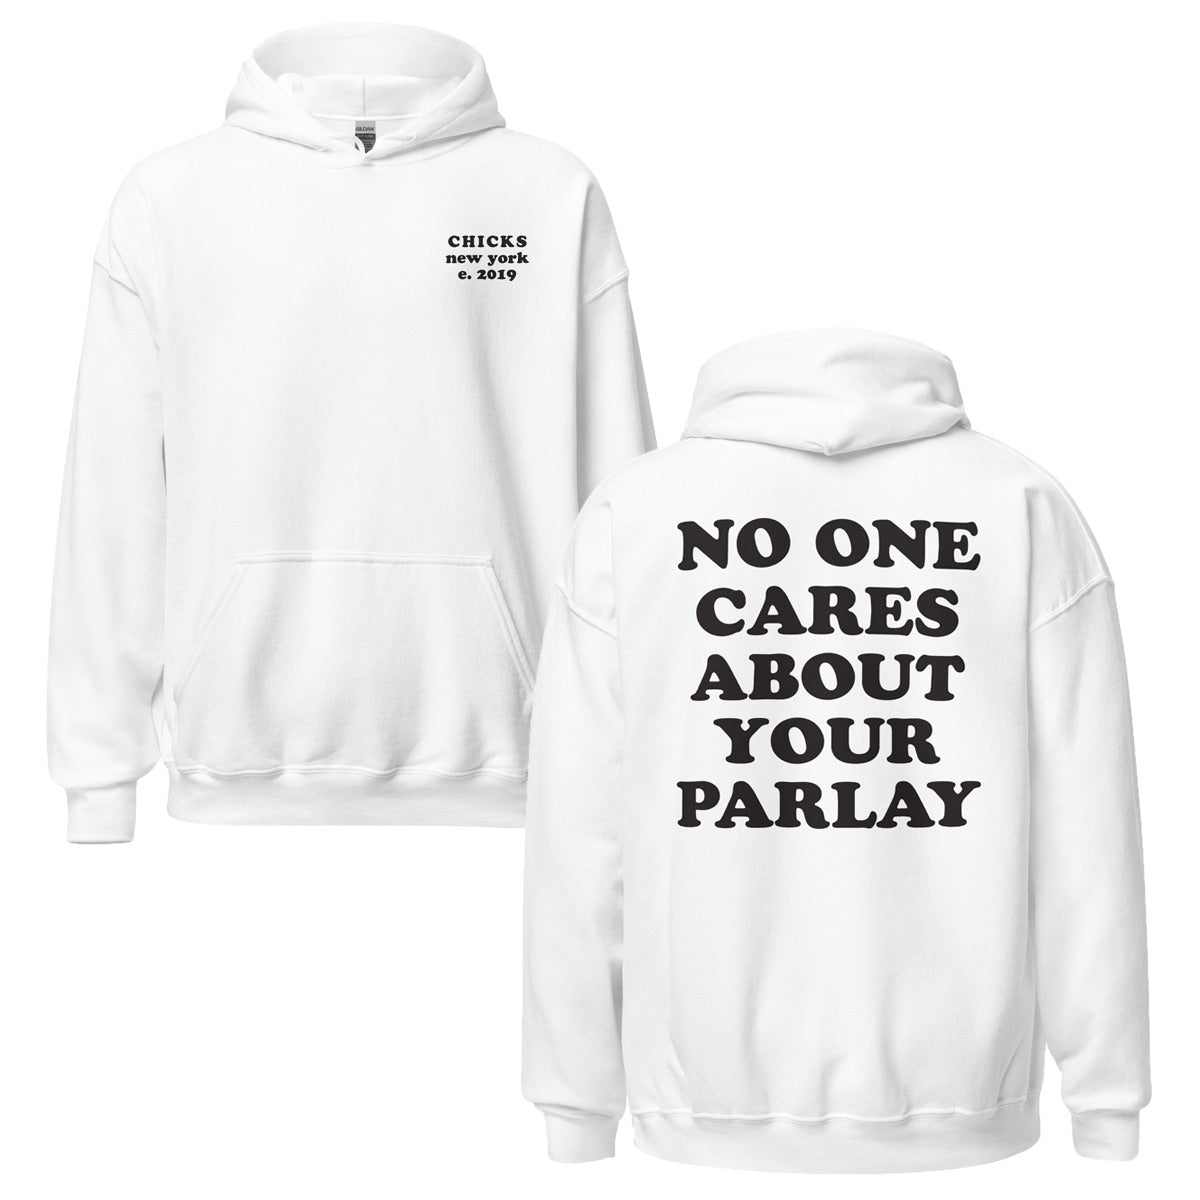 No One Cares About Your Parlay Hoodie-Hoodies & Sweatshirts-CHICKS-White-S-Barstool Sports